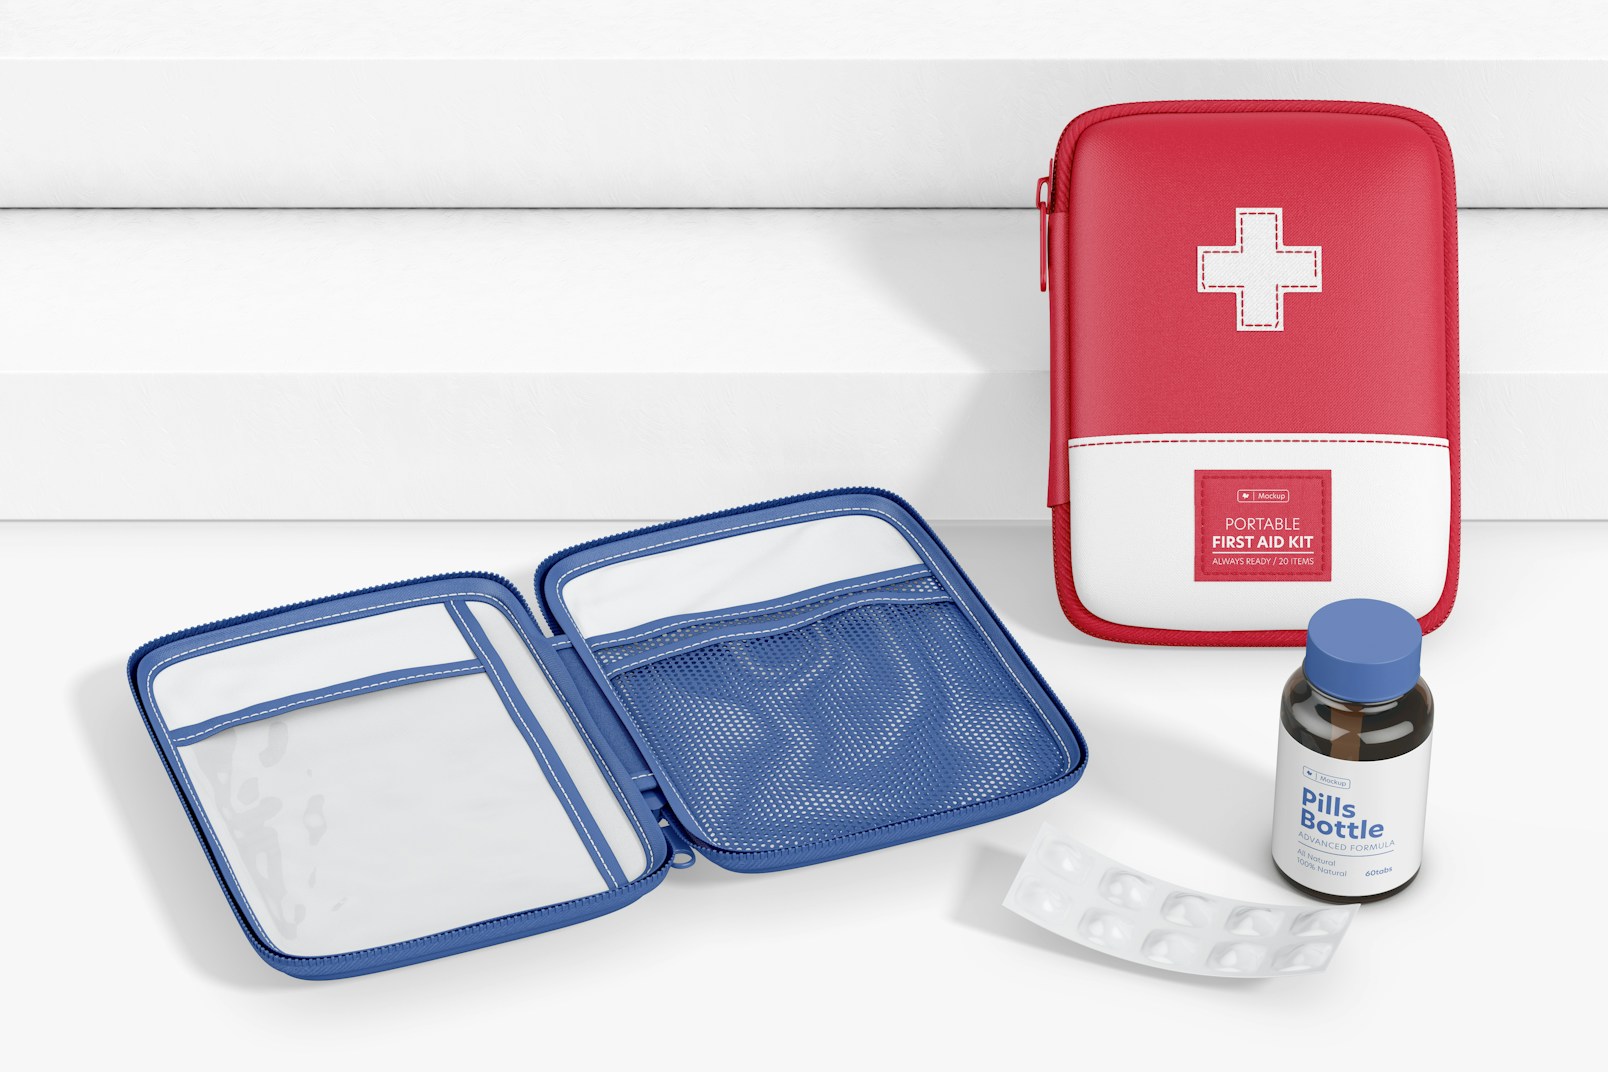 Portable First Aid Kit Mockup, Opened and Closed